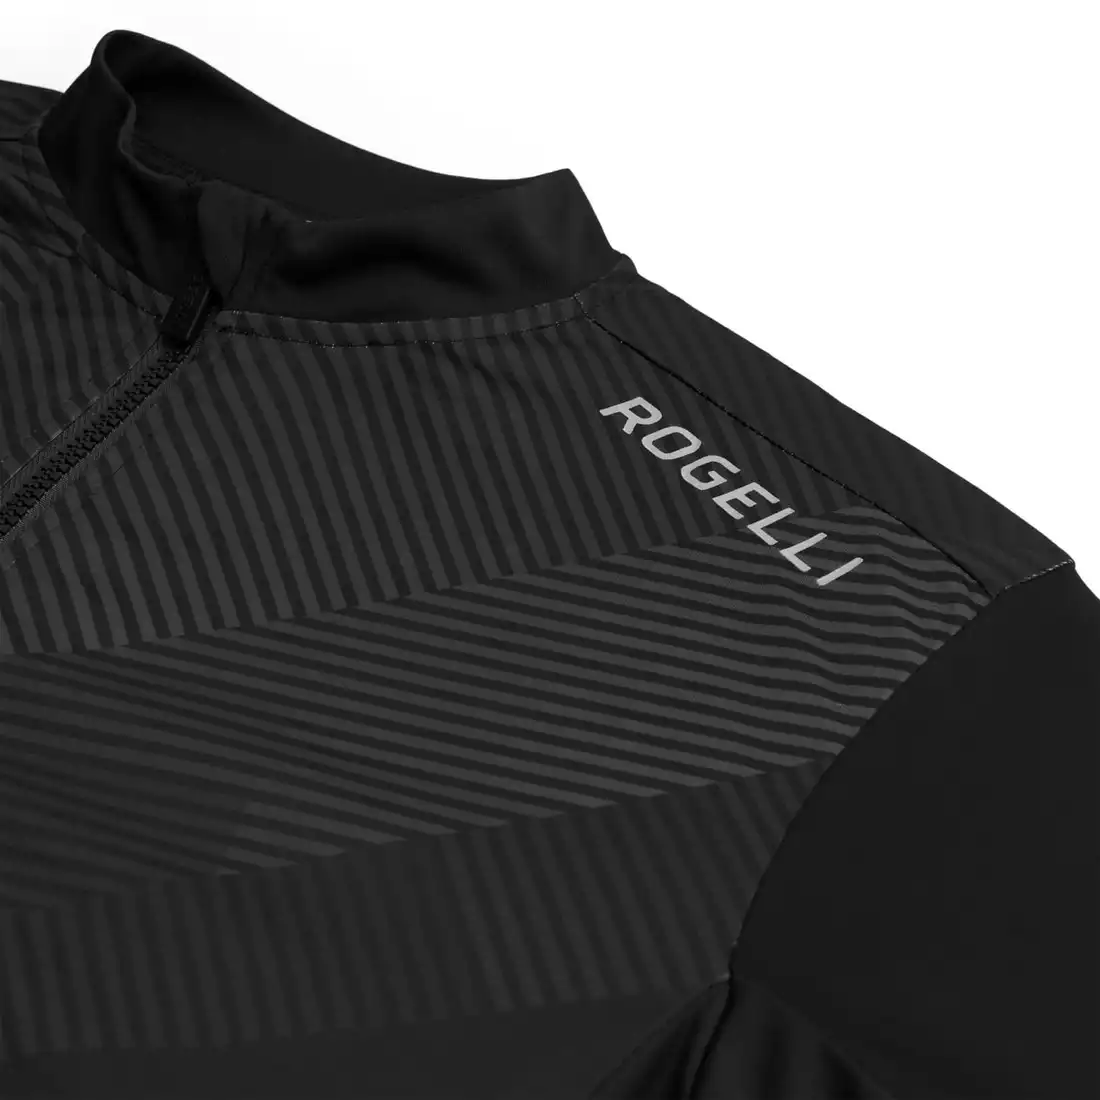 Rogelli DUSK men's cycling jersey, black and gray